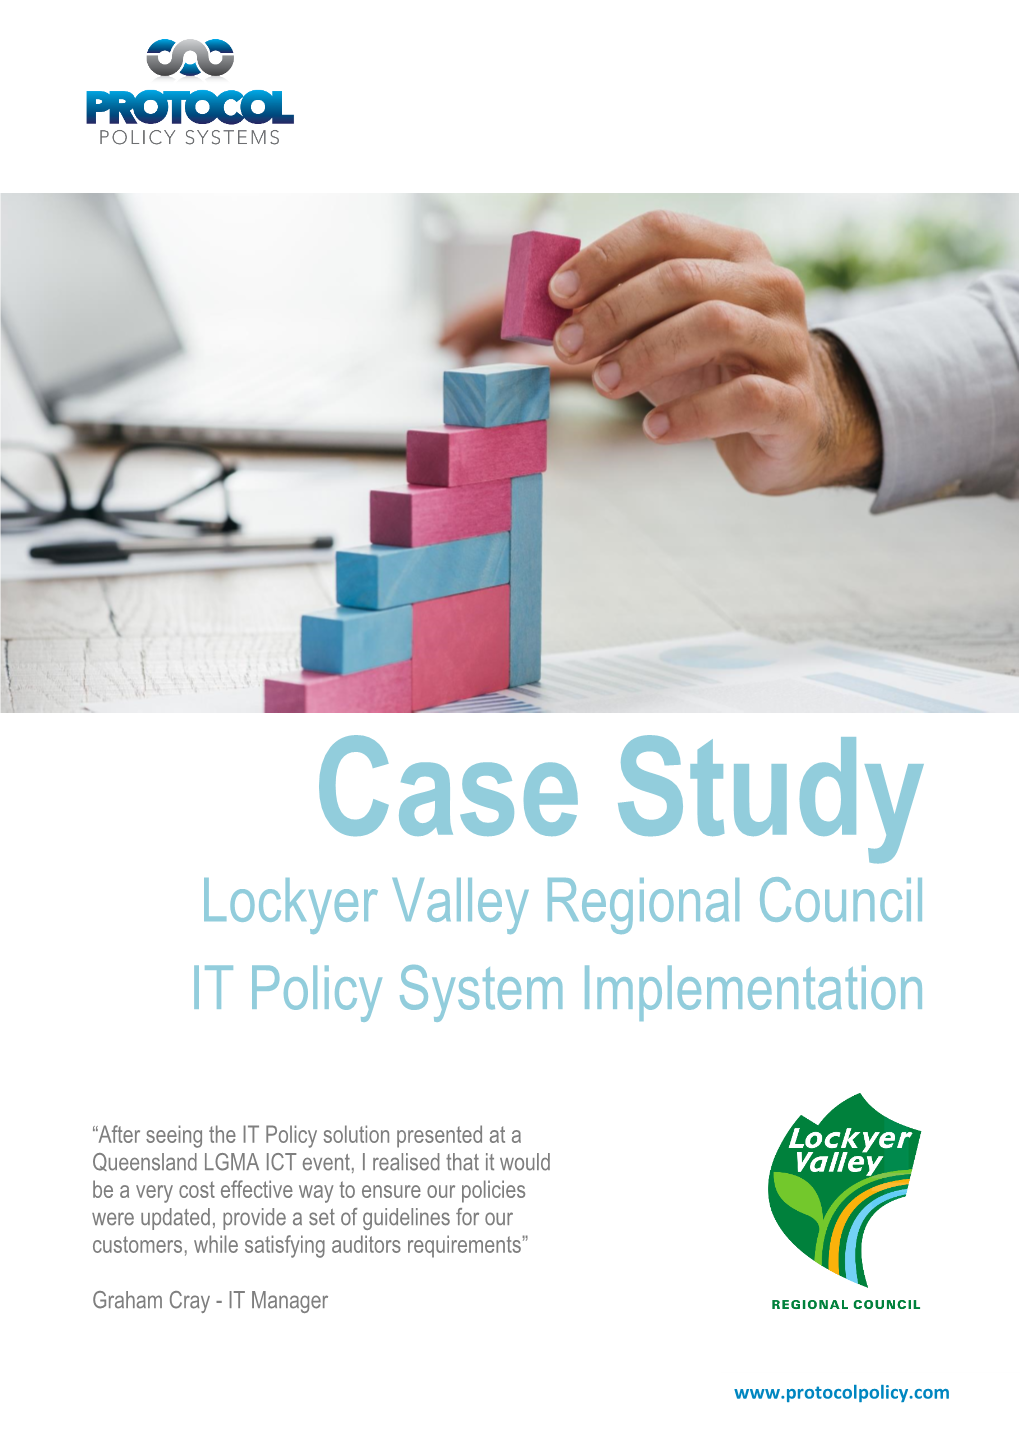 Lockyer Valley Regional Council IT Policy System Implementation